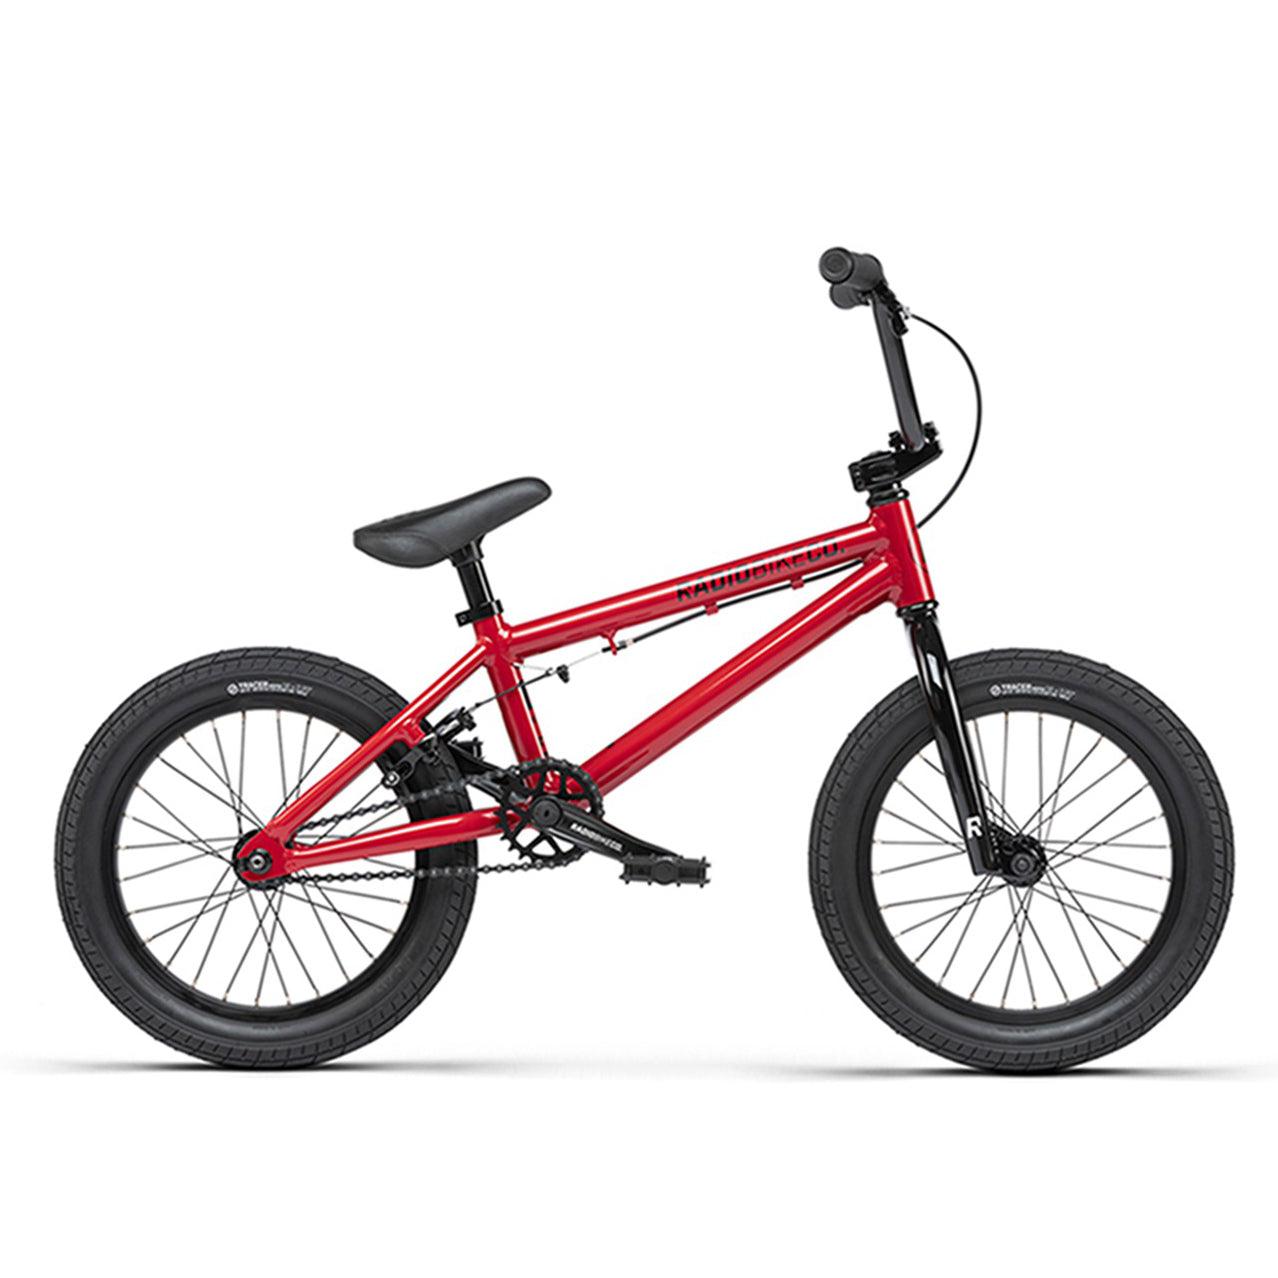 A red Radio Dice 16 Inch Bike with black Salt Traction Tyres and 6061 Alloy frame, featuring black handlebars, viewed from the side against a white background.